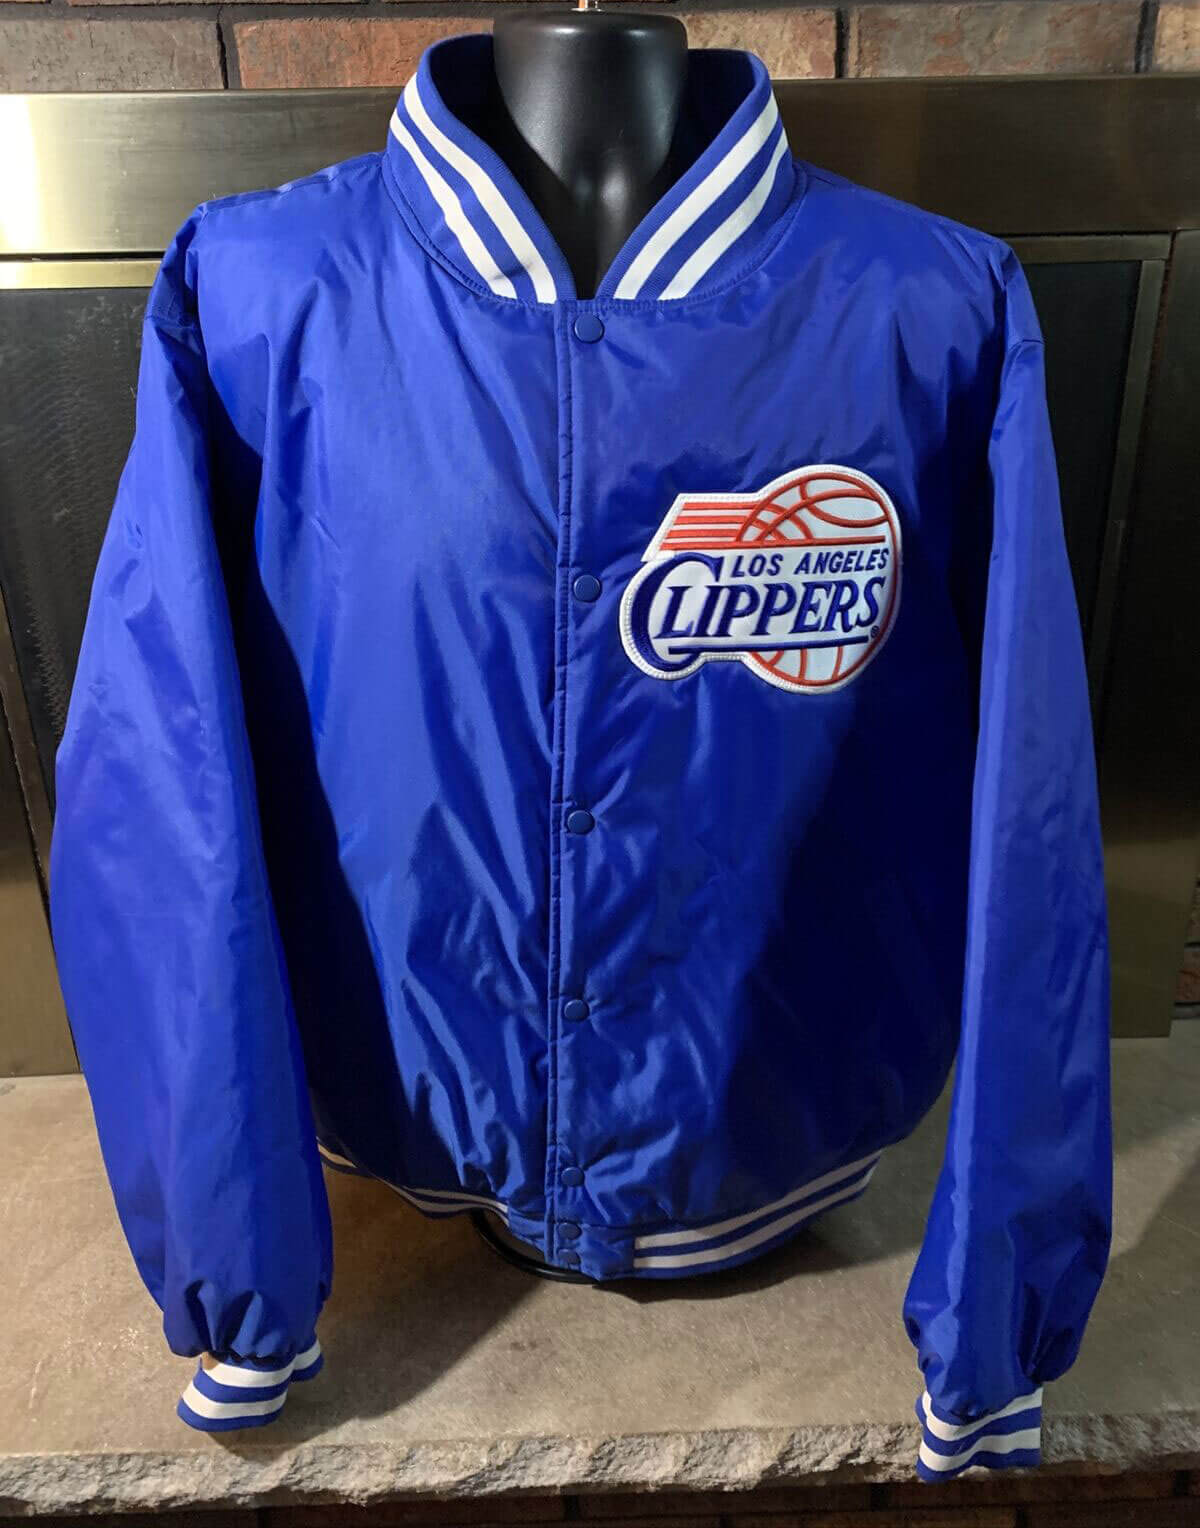 Retro/Throwback Los Angeles Clippers (San Diego) Authentic NBA